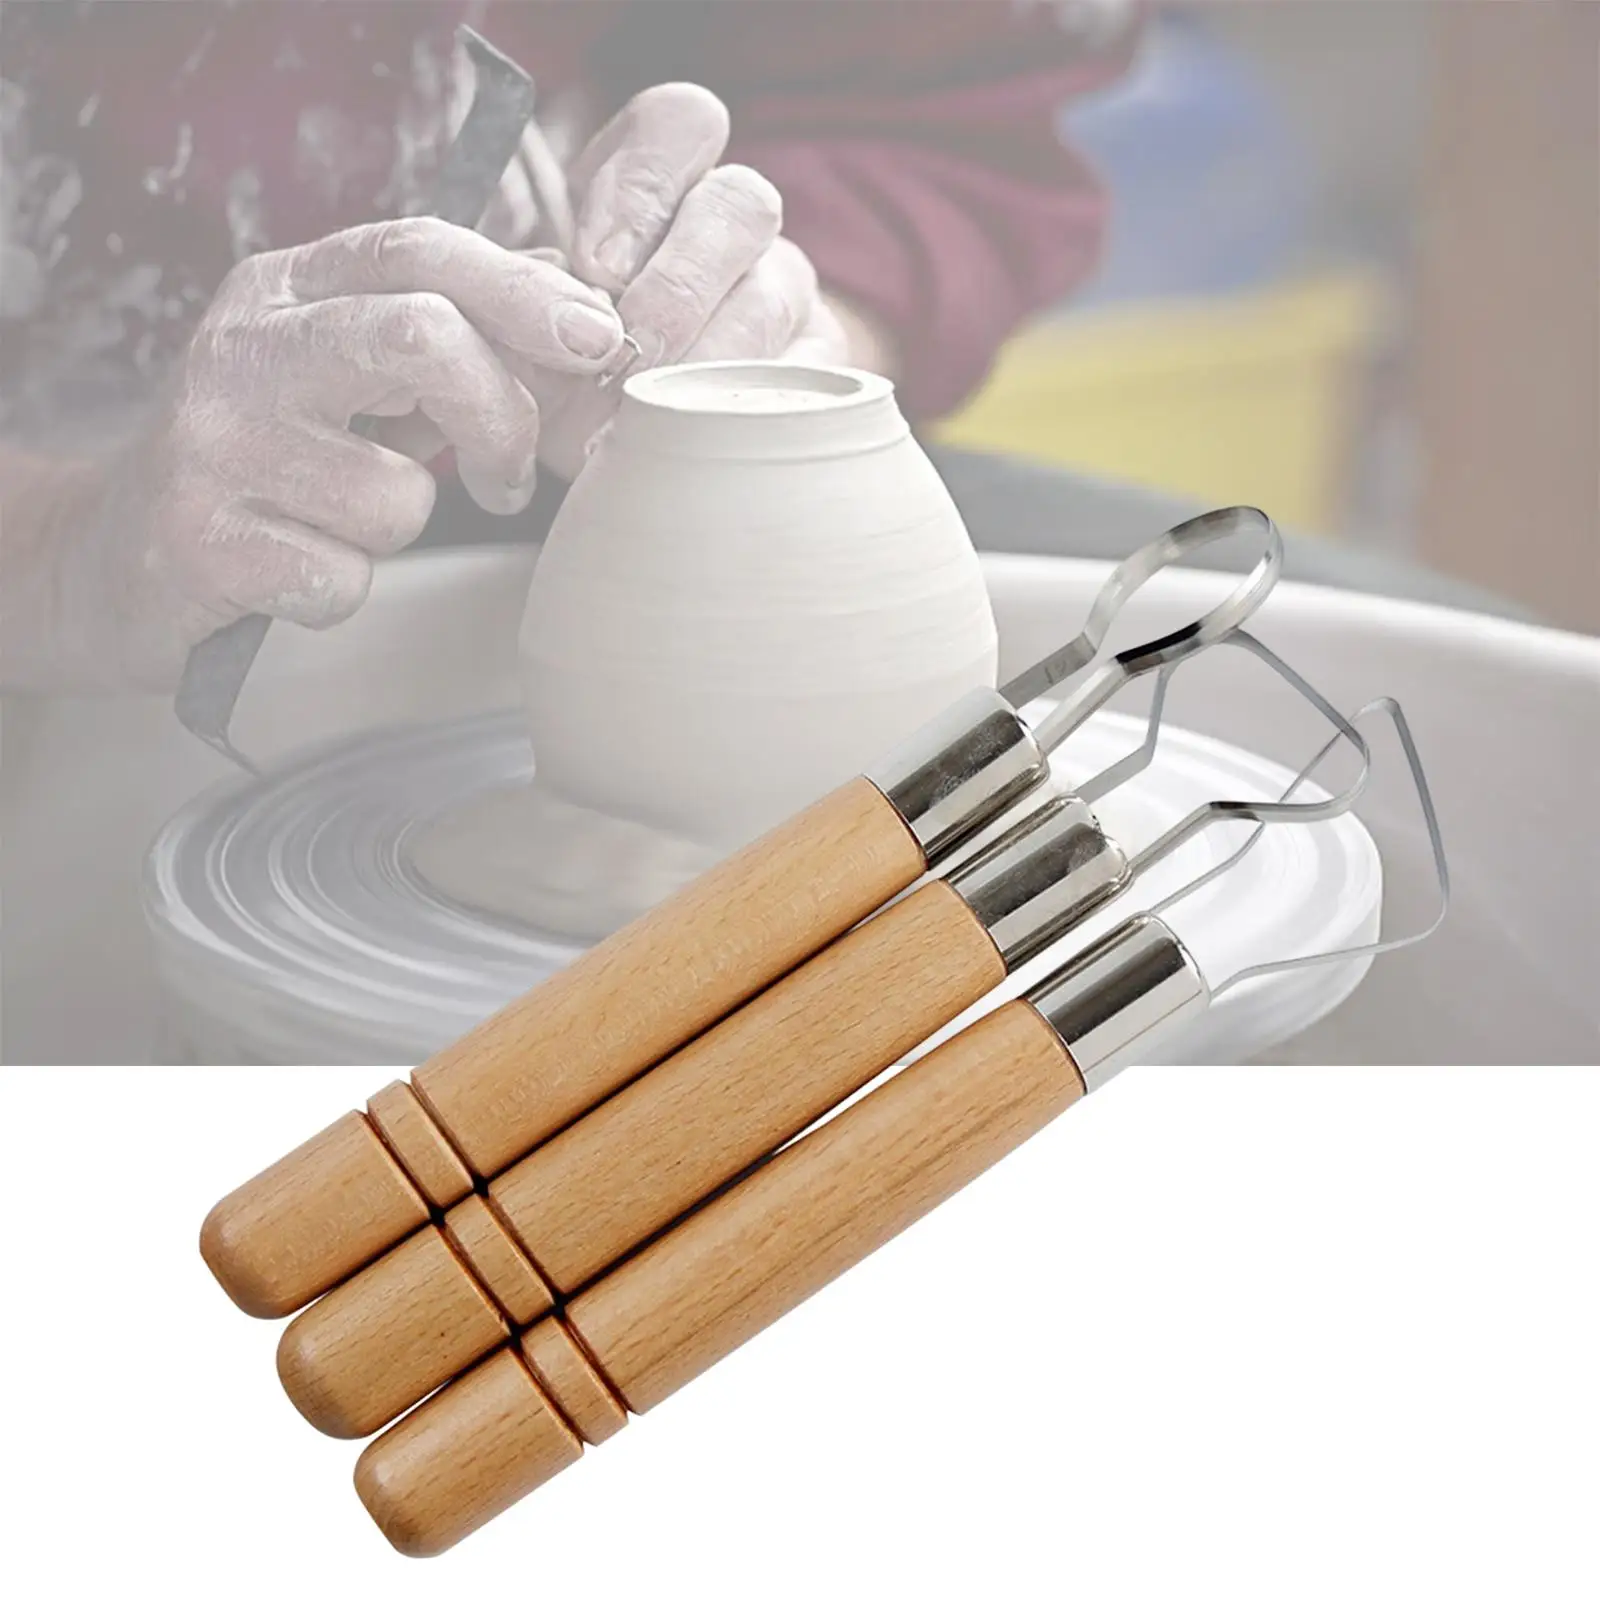 3x Clay Pottery  Carving  Ceramic Craft  Shaping Texture Tools for Beginners Artists